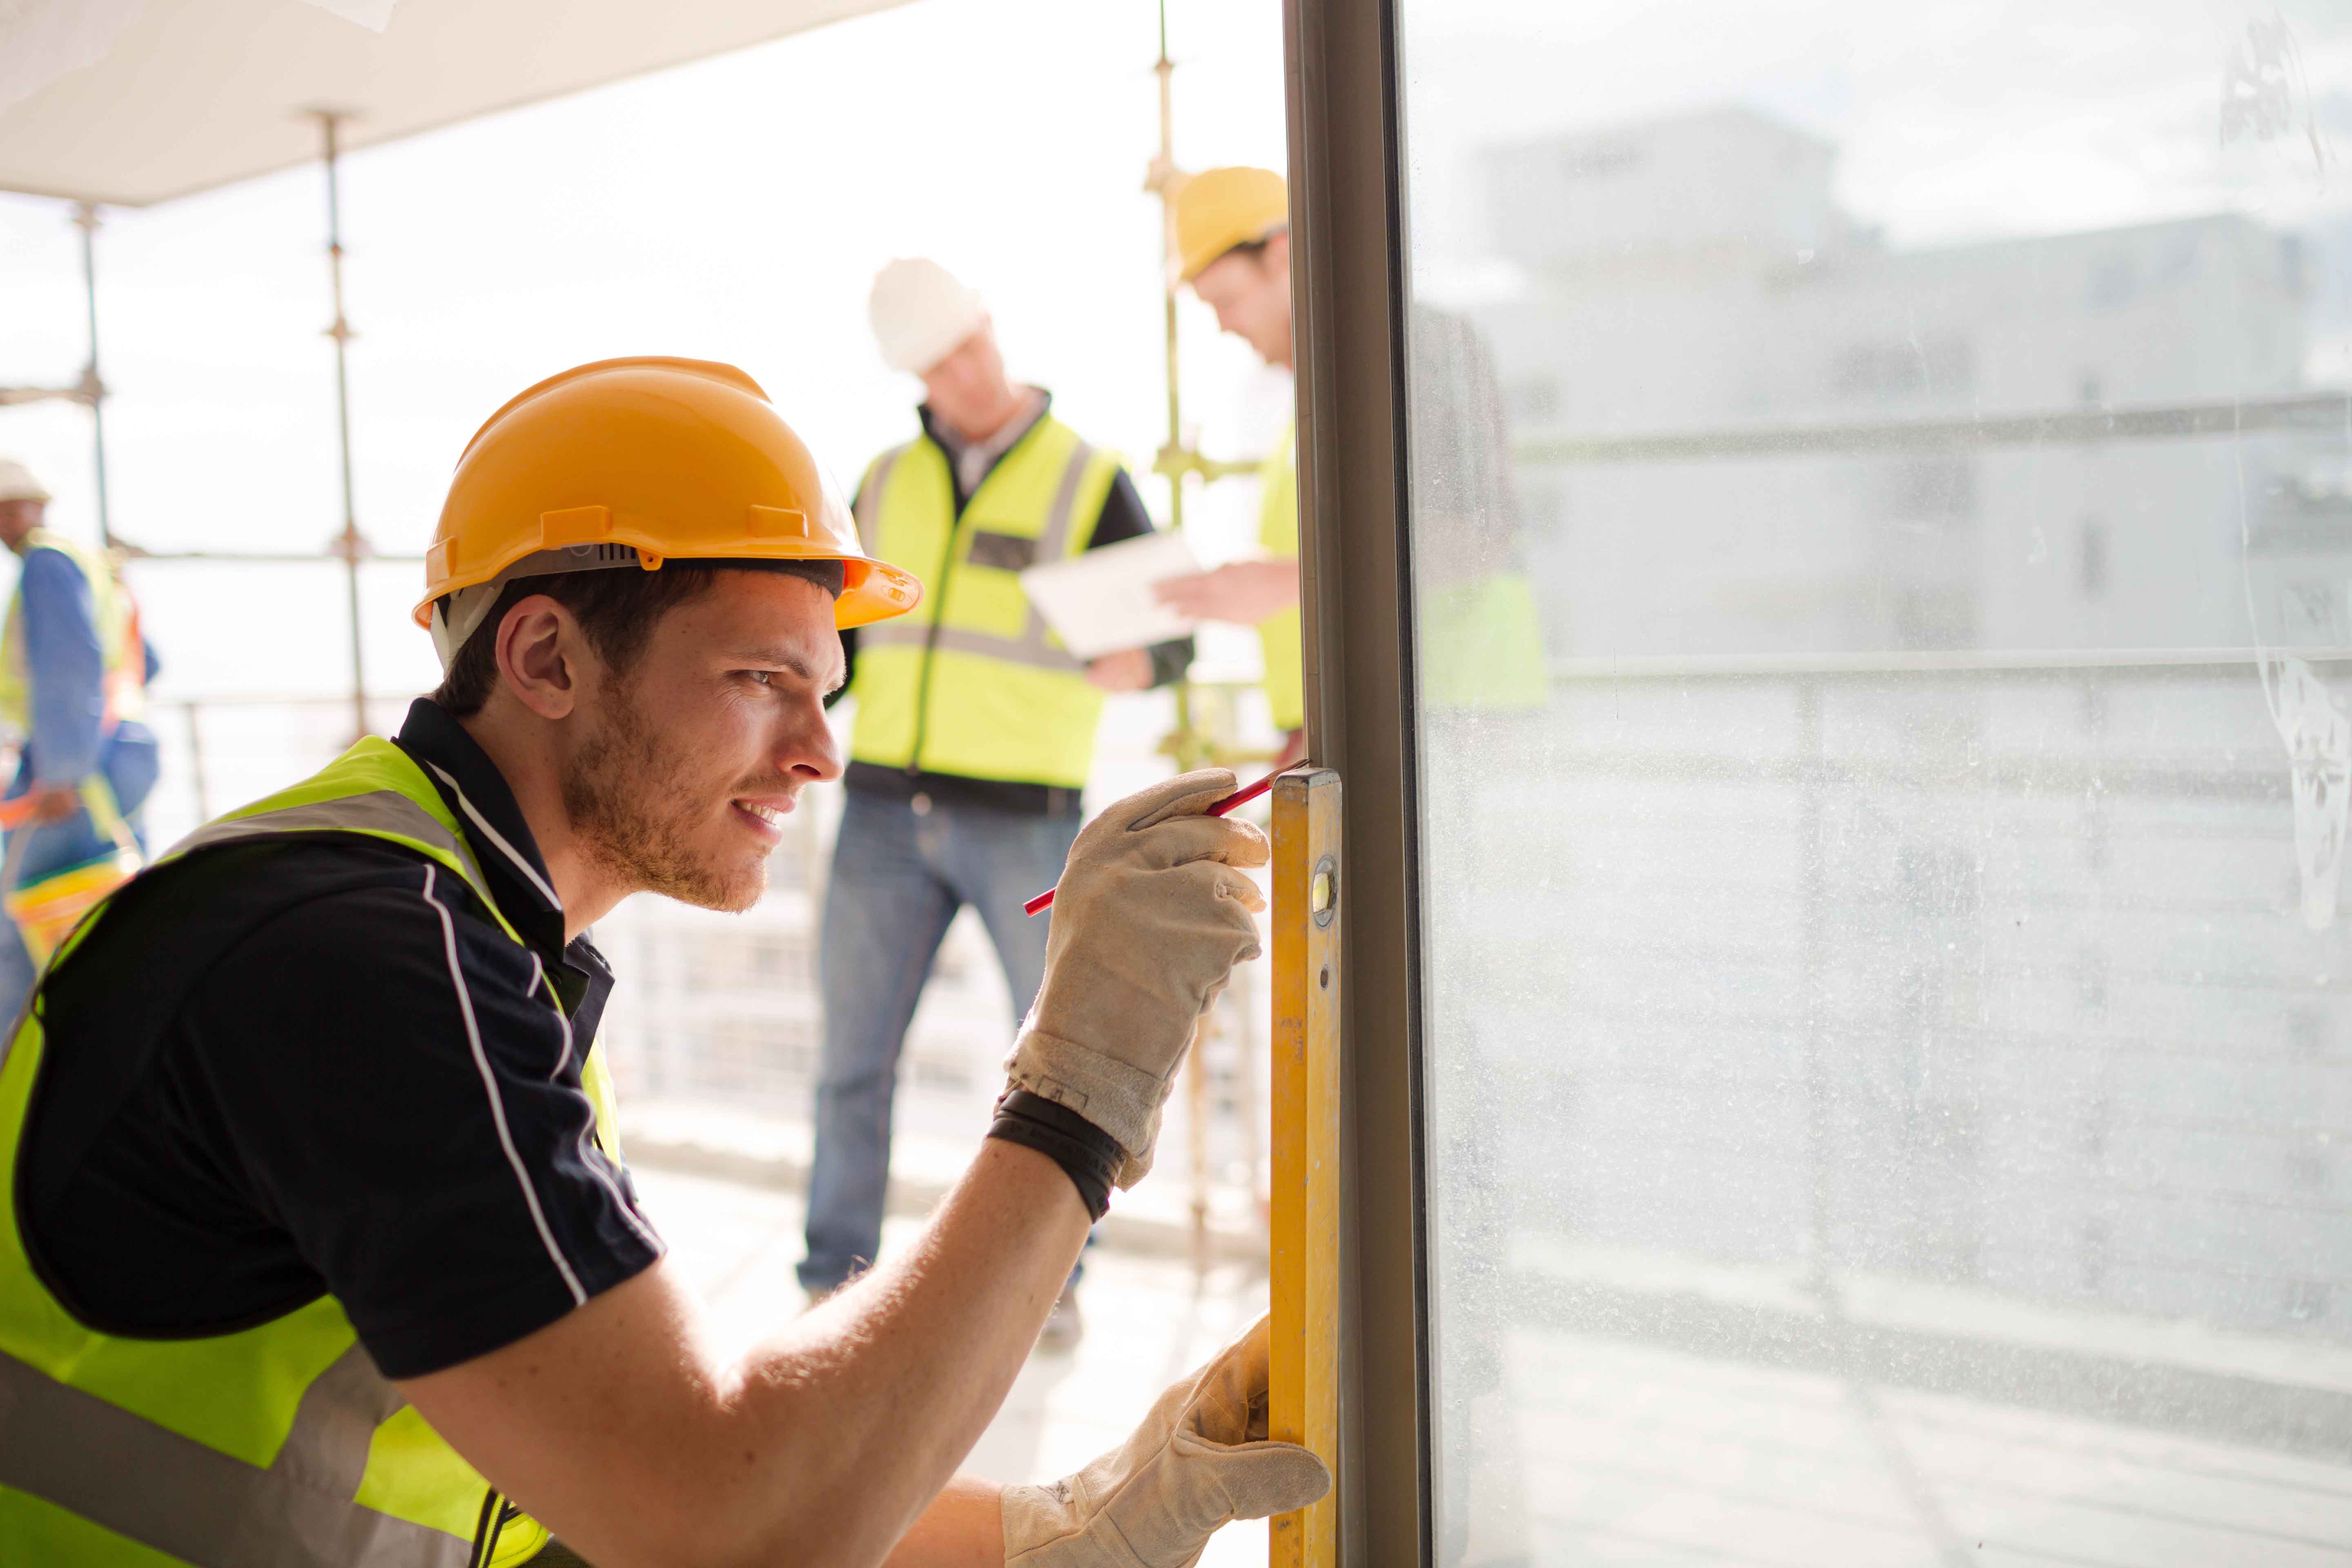 Skills Shortage: What Are Construction Candidates Really Looking For?